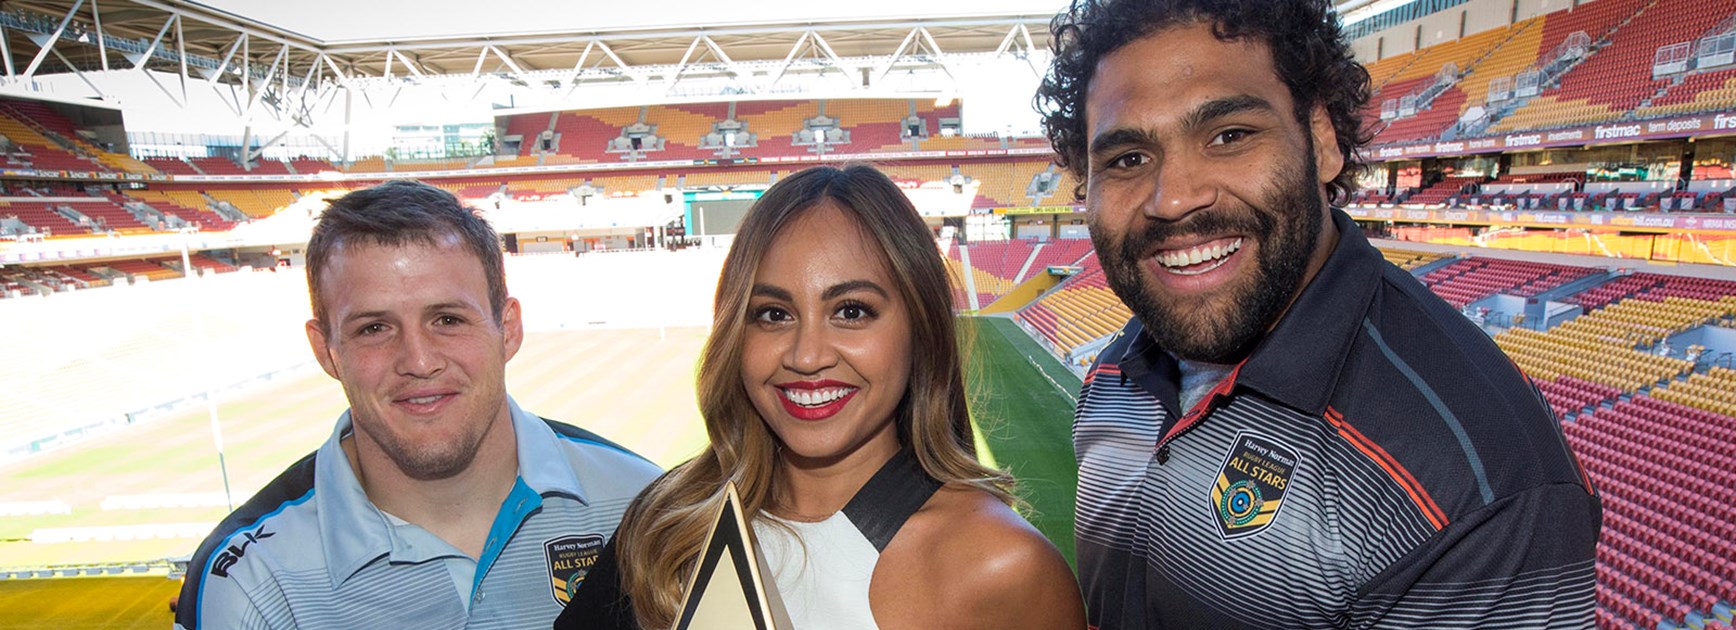 Josh Morris, Jessica Mauboy and Sam Thaiday at the launch of the 2016 All Stars Match.